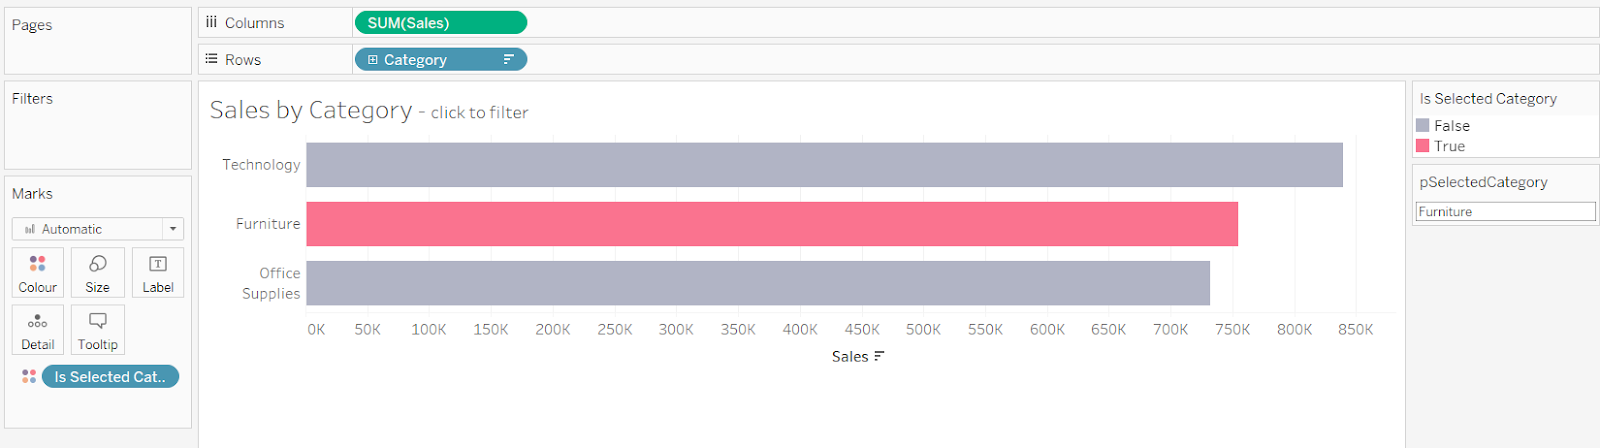 adding a boolean field to the colour shelf in Tableau to highlight a selected field